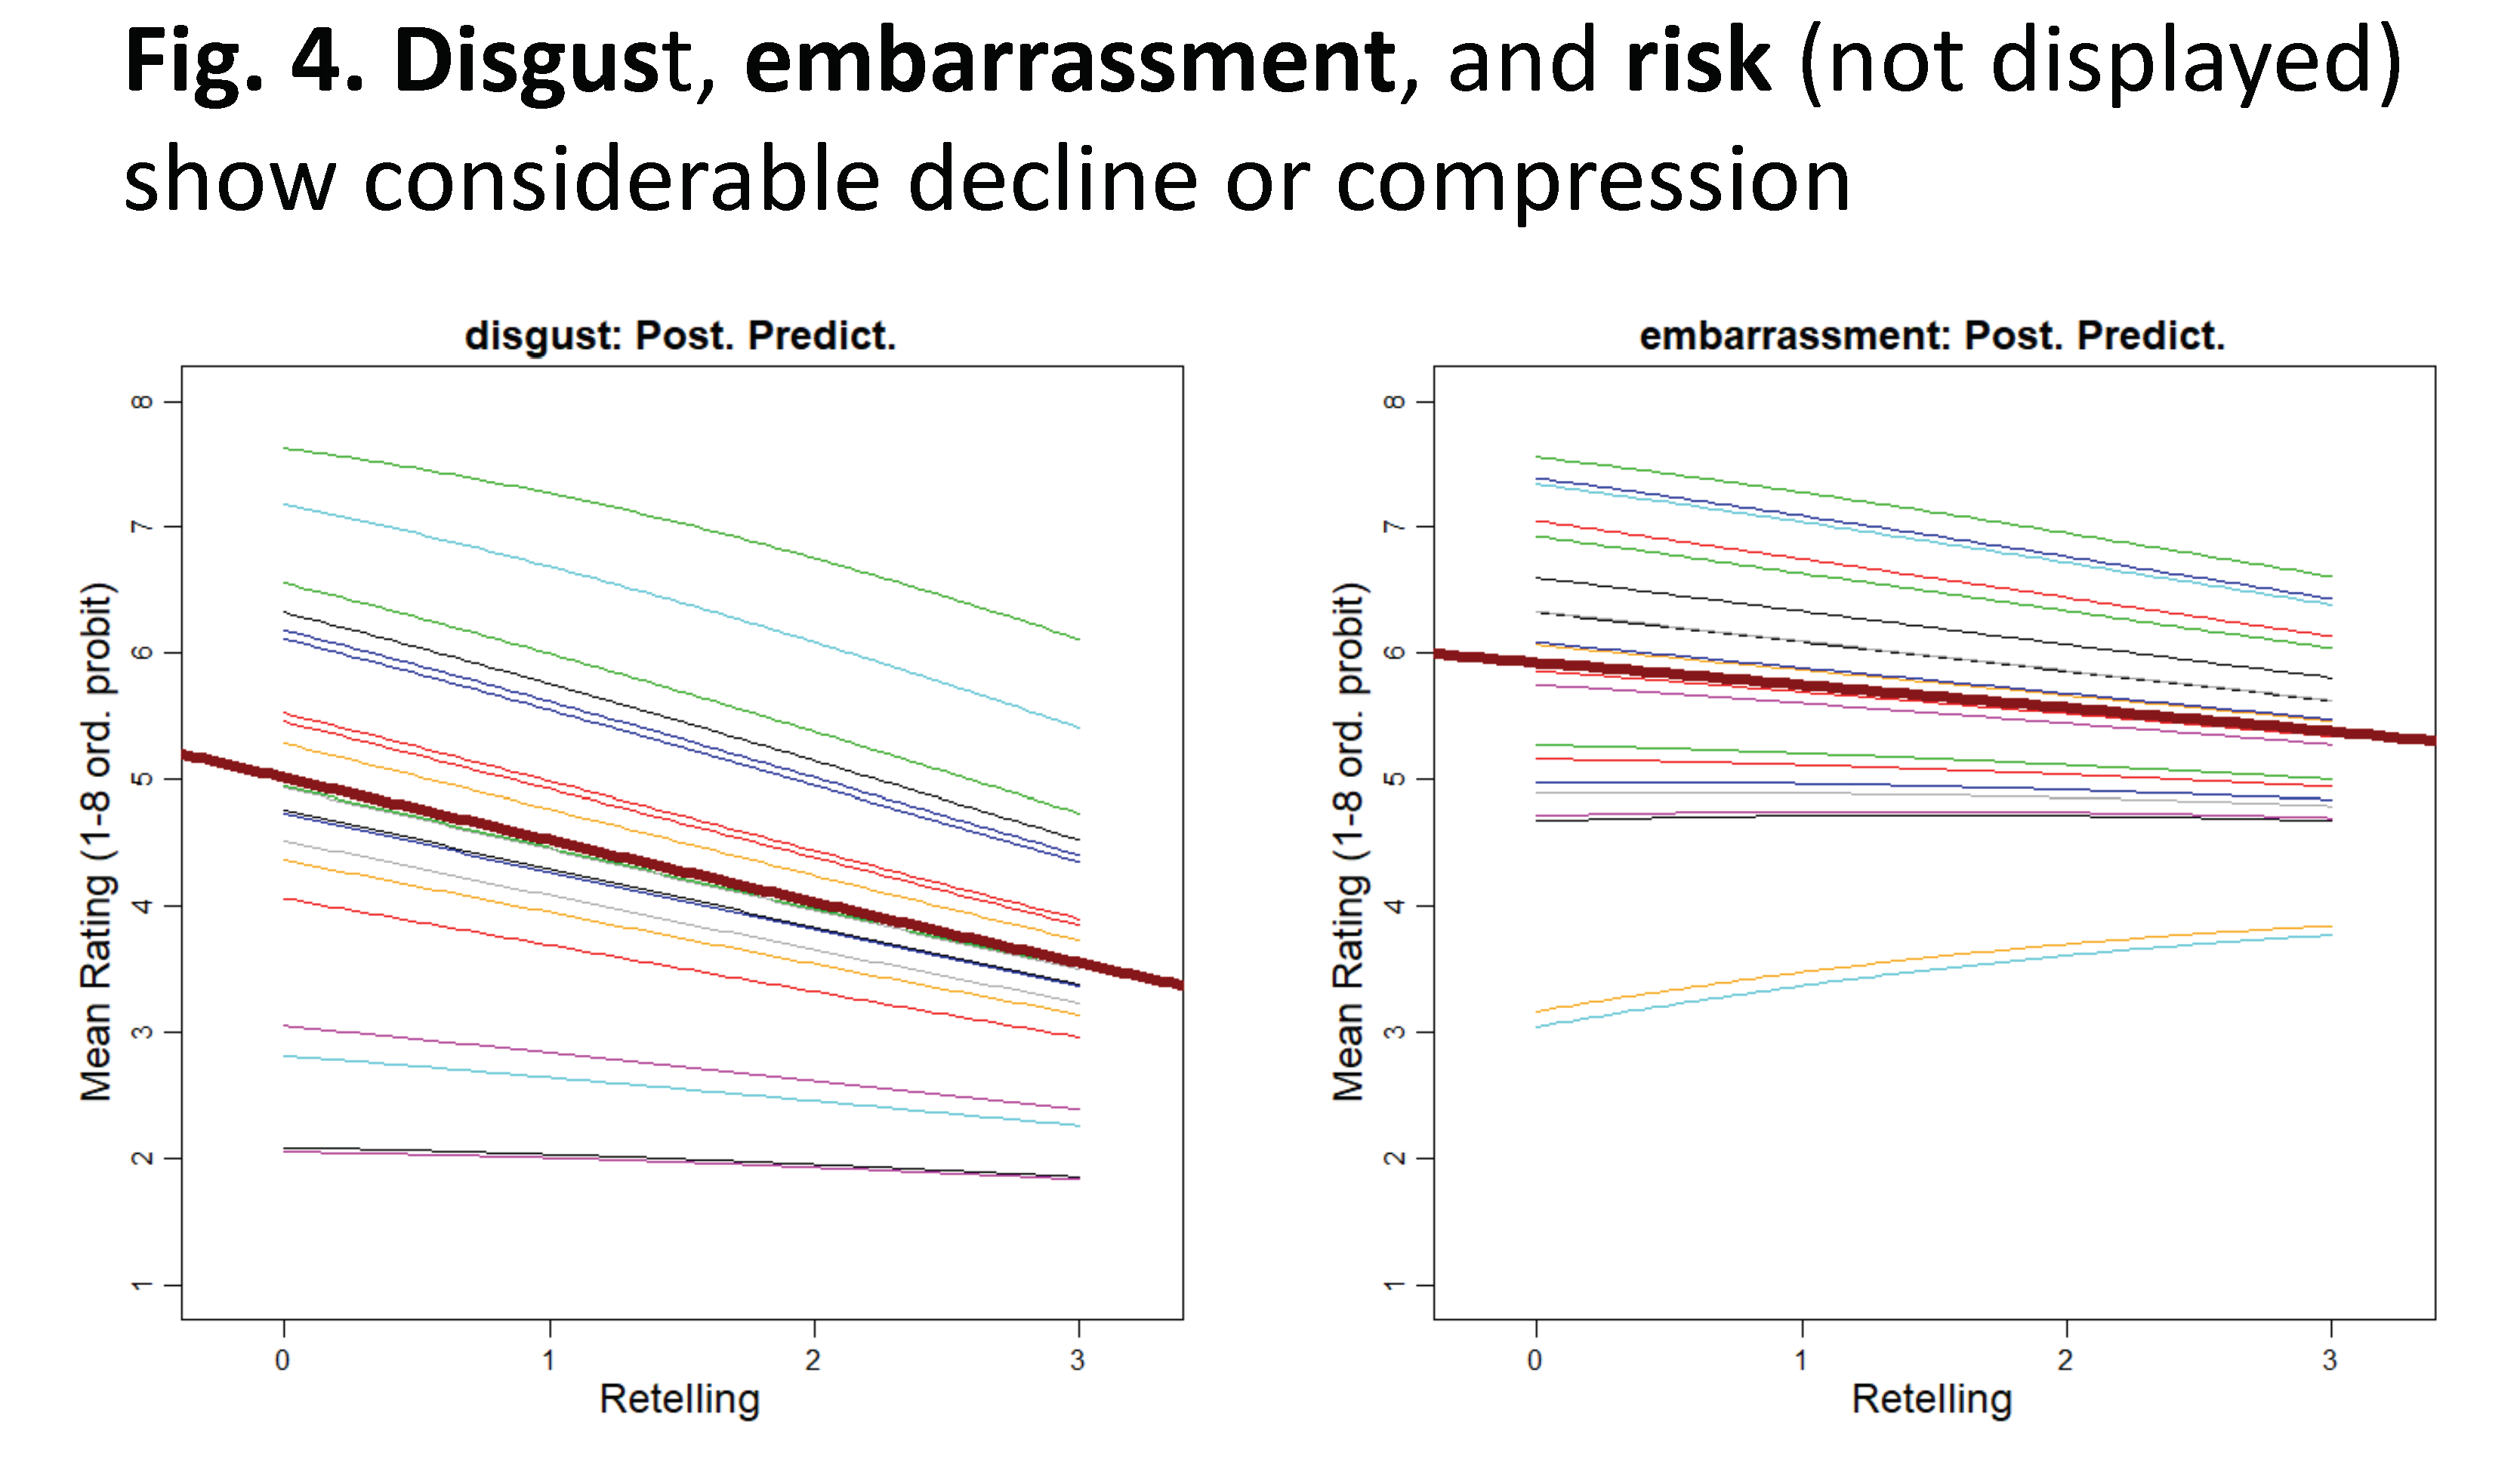 Figure four: disgust, embarrassment, and risk (not displayed) show considerable decline or compression